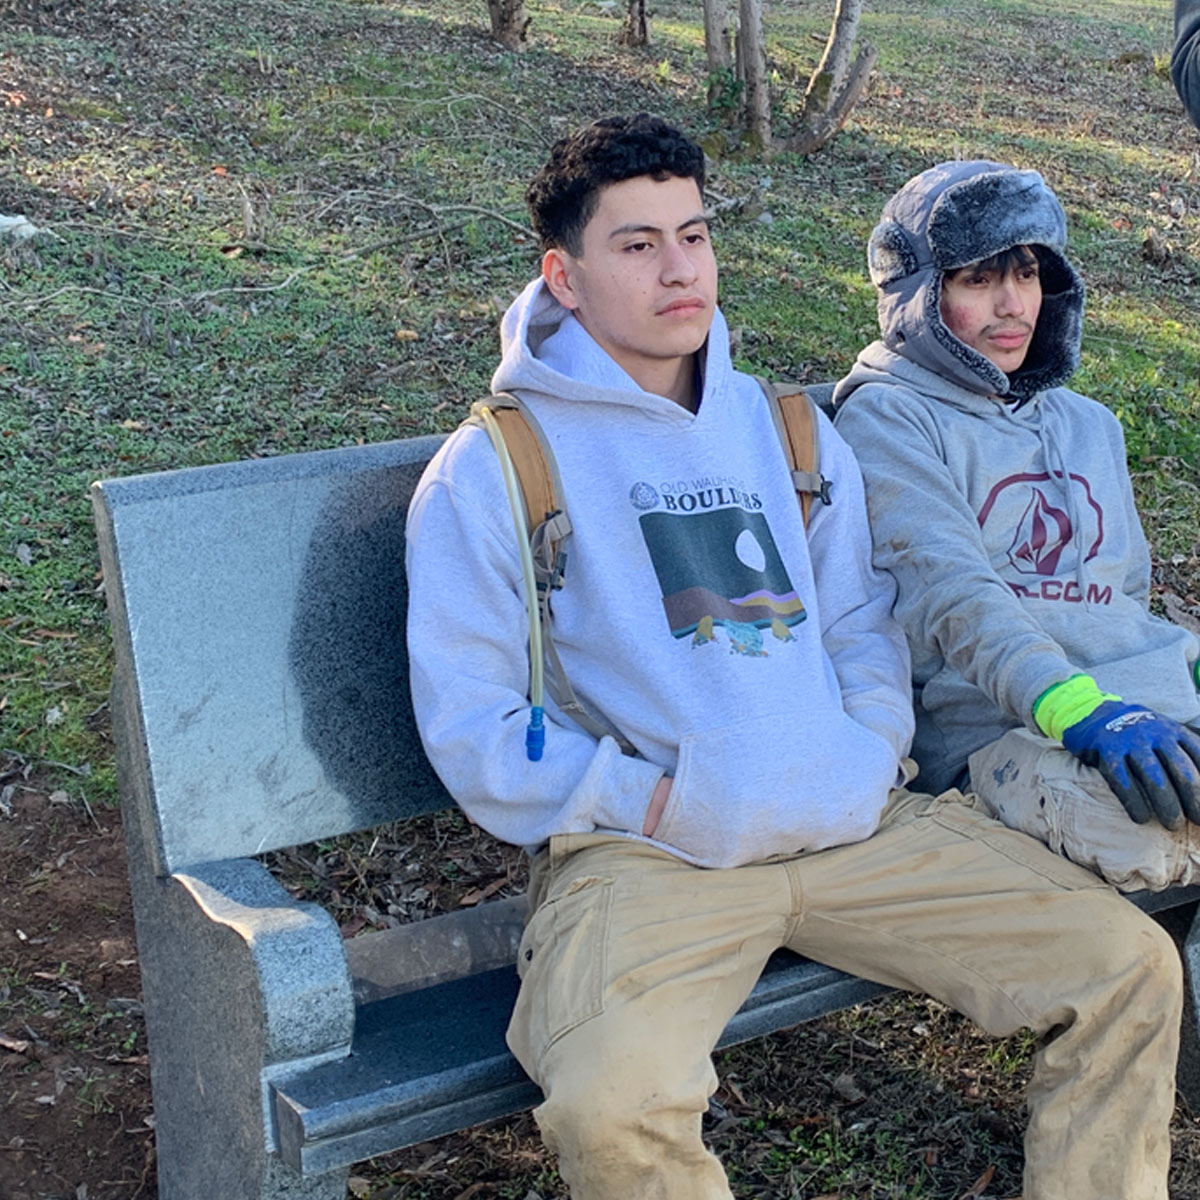 Two young Hispanic males sit contemplatively on a granite park bench